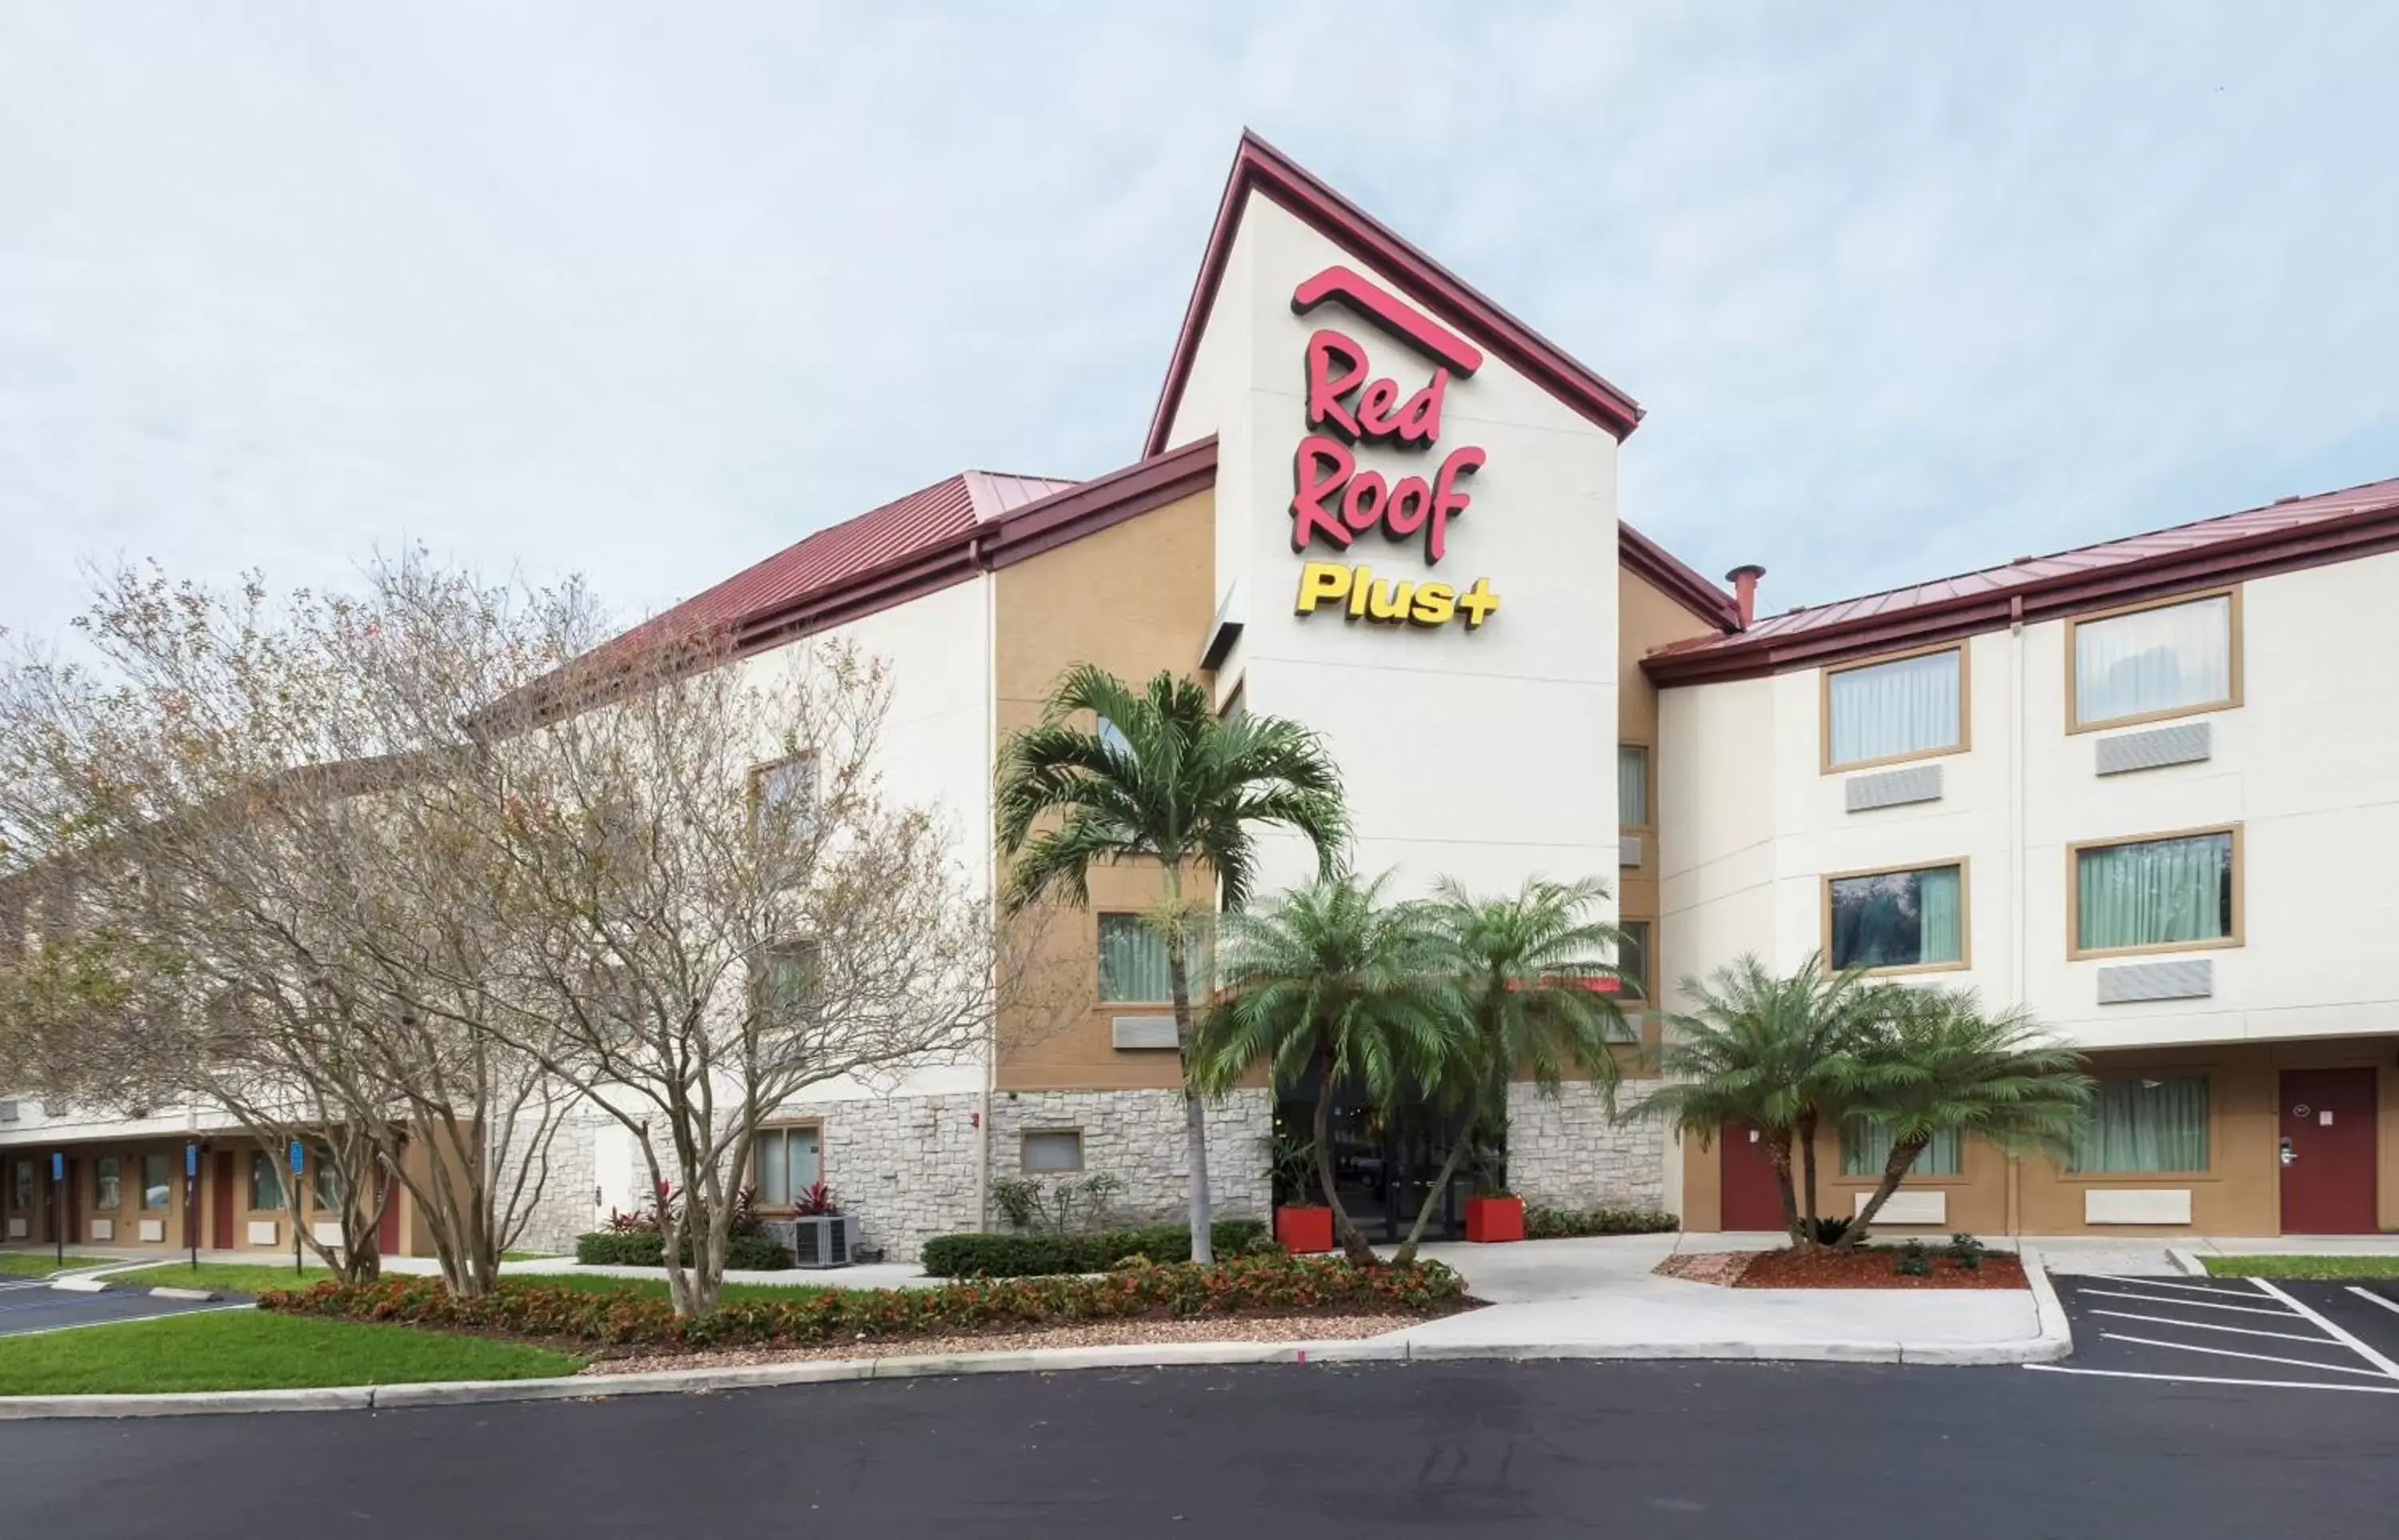 Property building in Red Roof Inn PLUS+ West Palm Beach